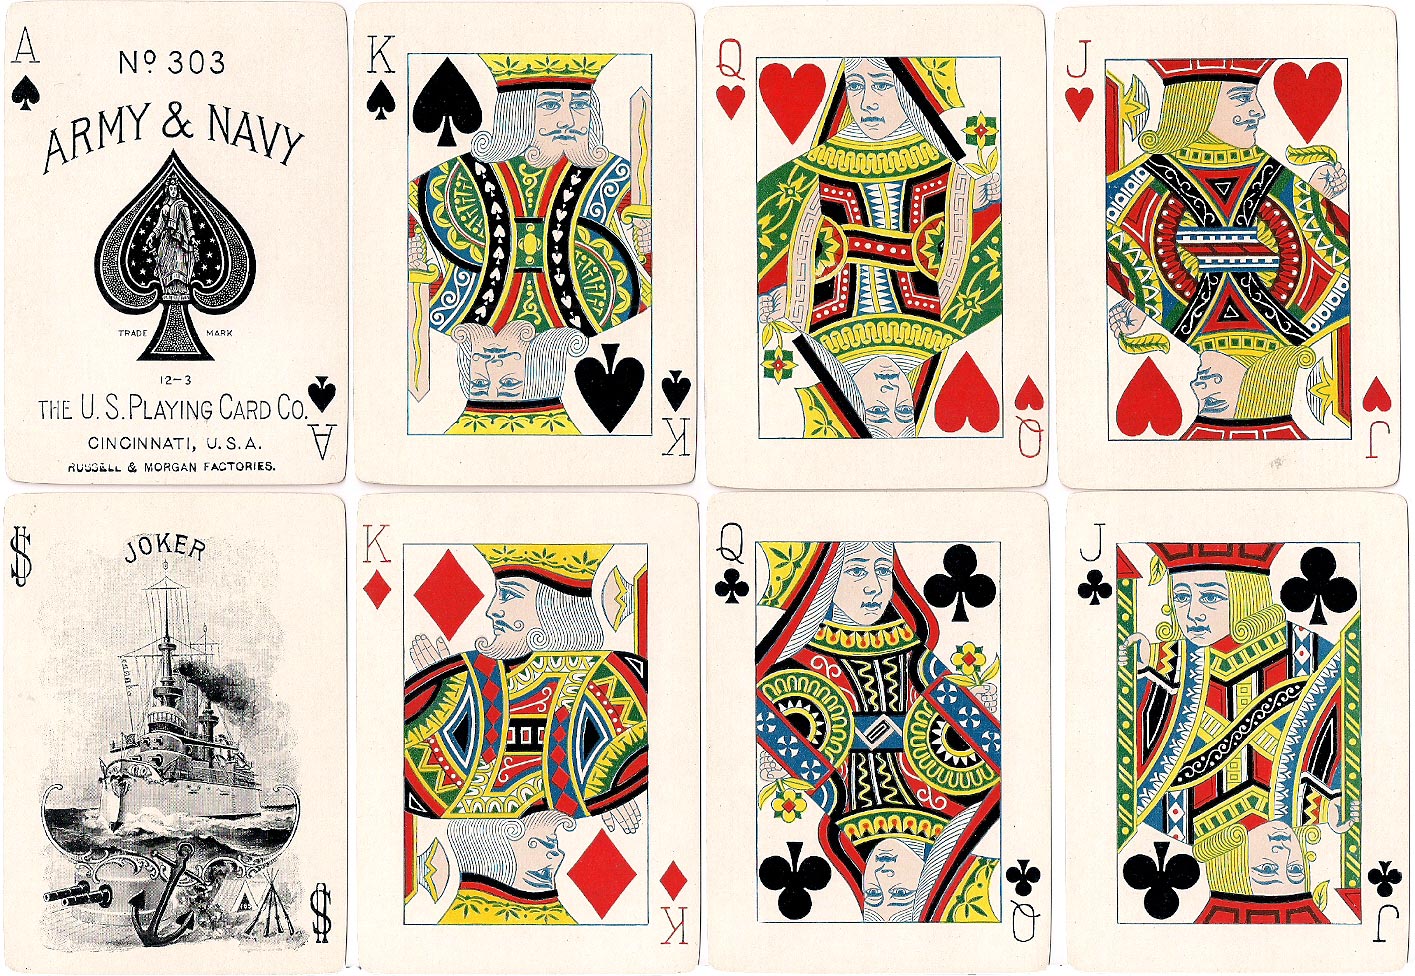 “Army & Navy #303” playing cards published by the United States Playing Card Co., Cincinnati, in c.1900